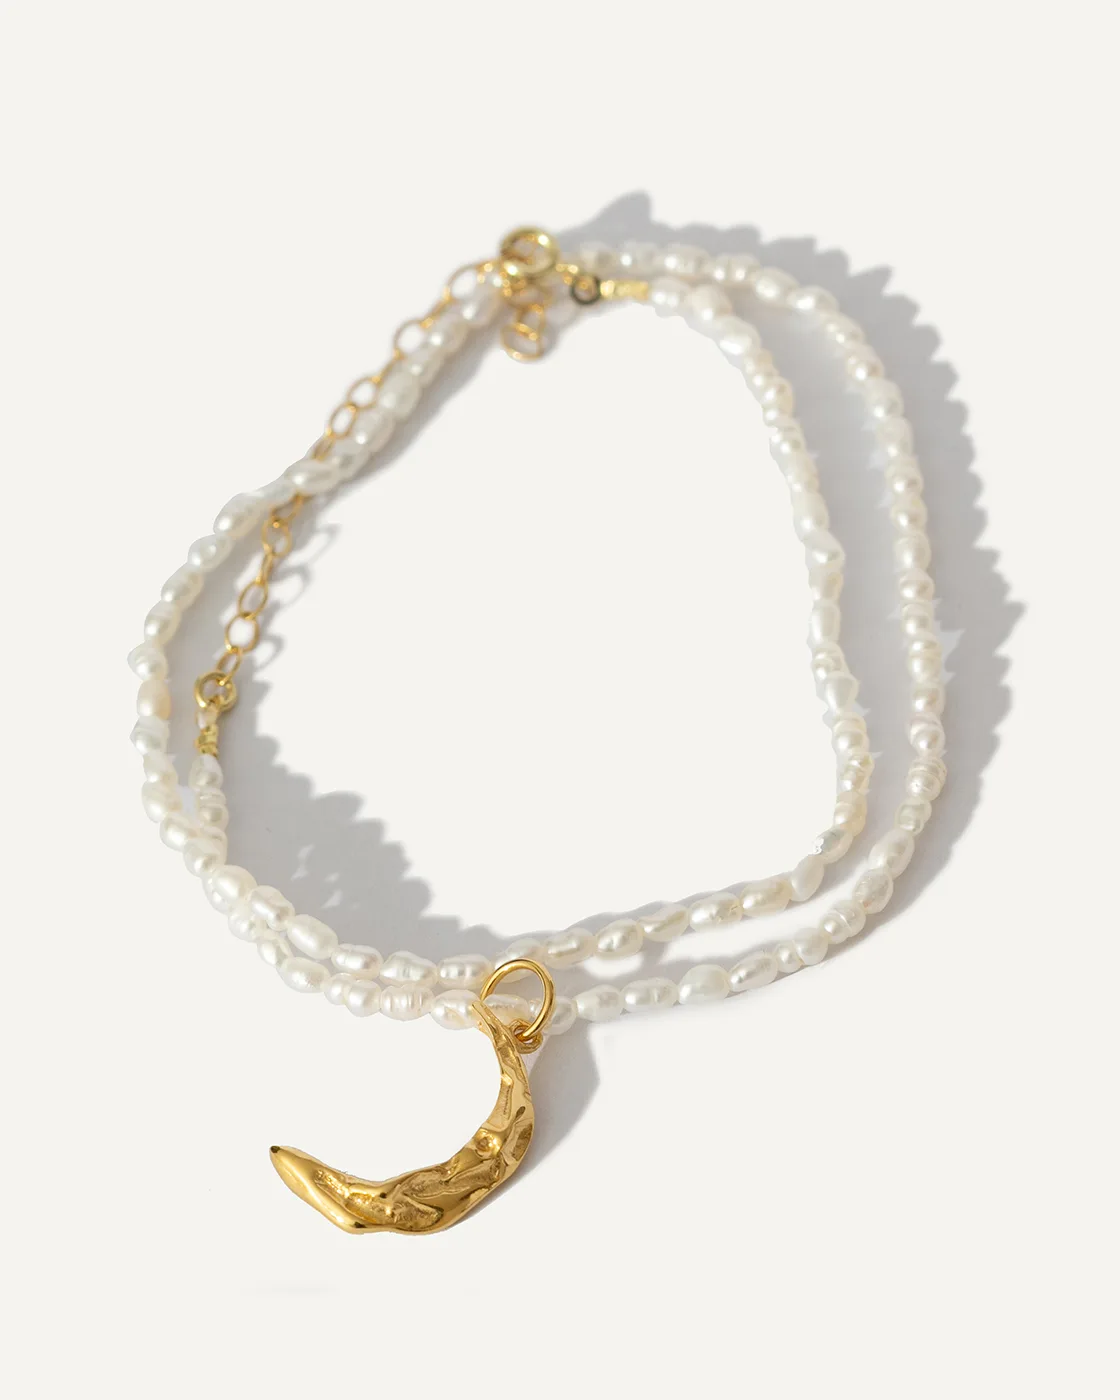 Méliès Moon Oval Pearl Necklace with Gold-Plated Pendant